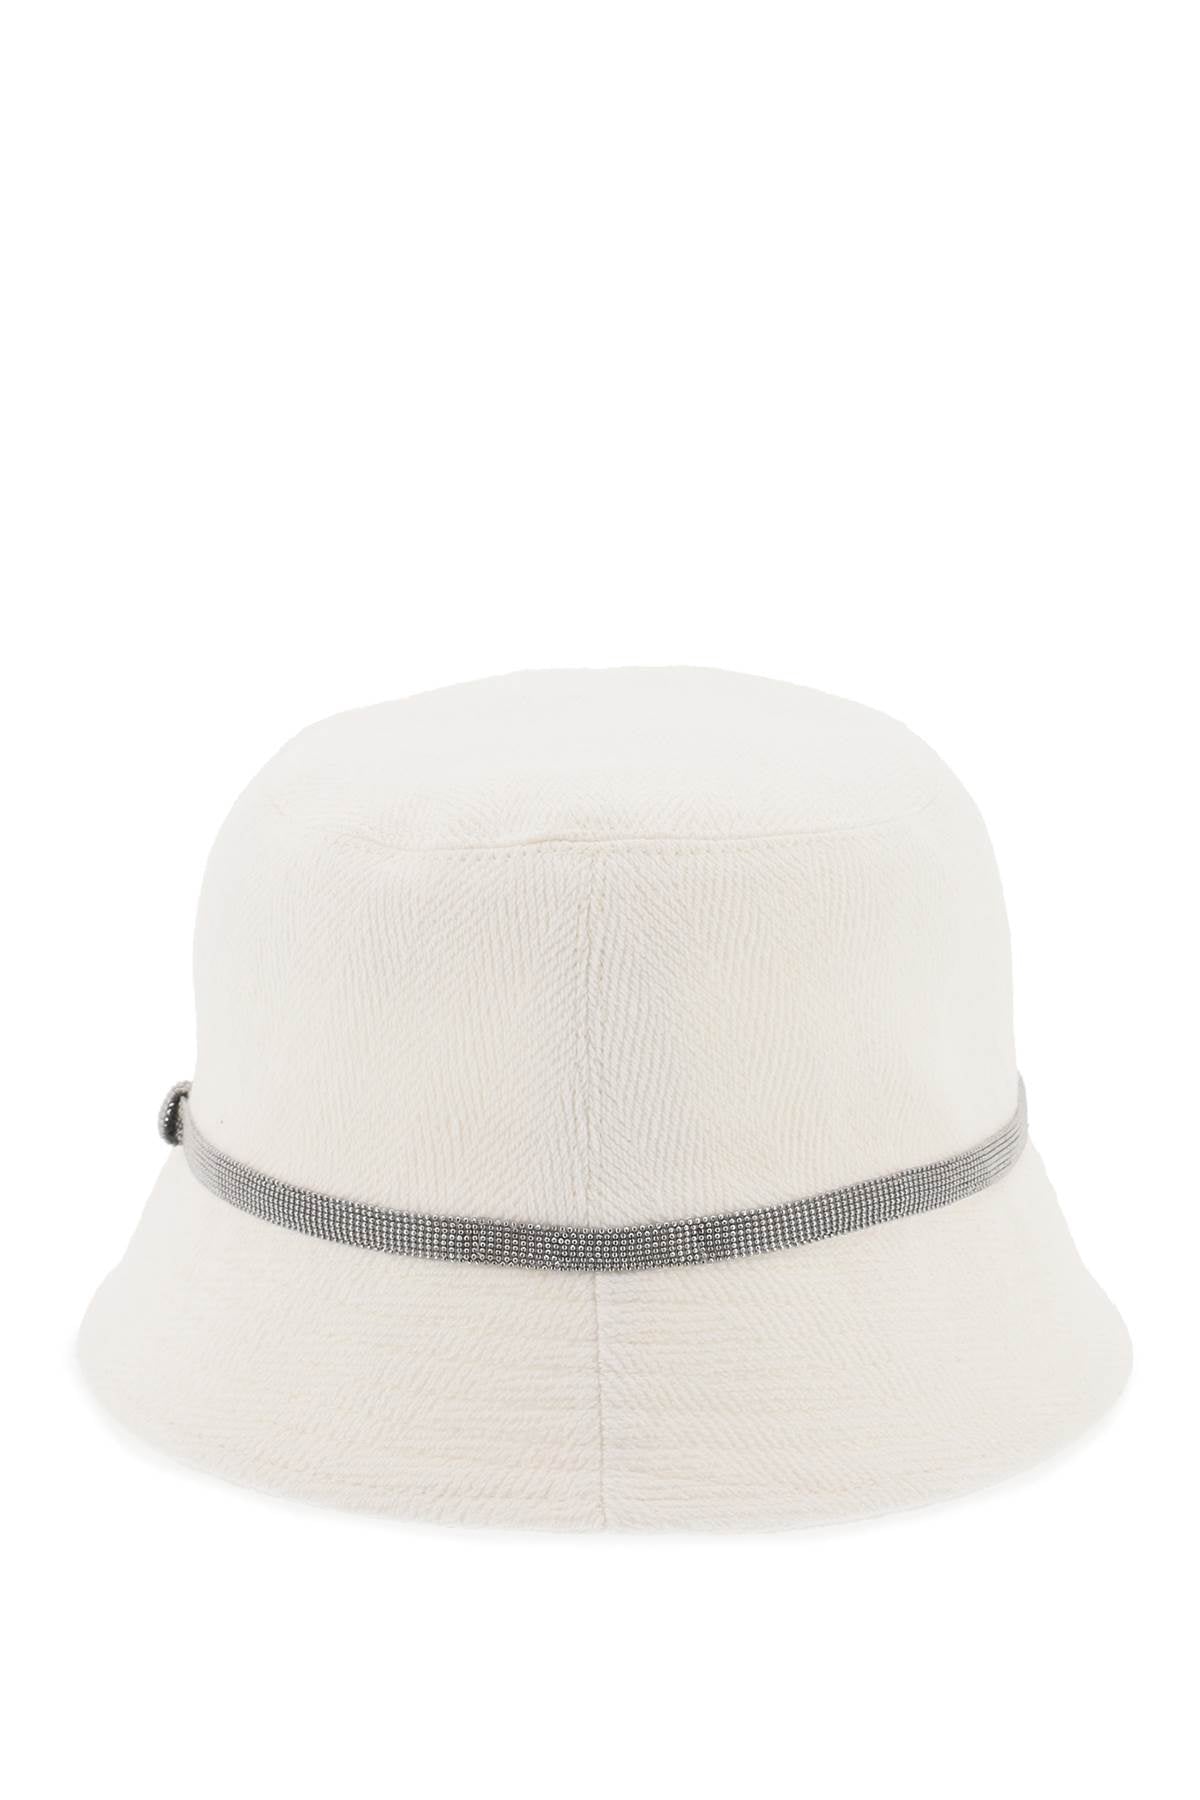 BRUNELLO CUCINELLI Shiny Band Bucket Hat with Monile Embroidery in White - Summer 2024